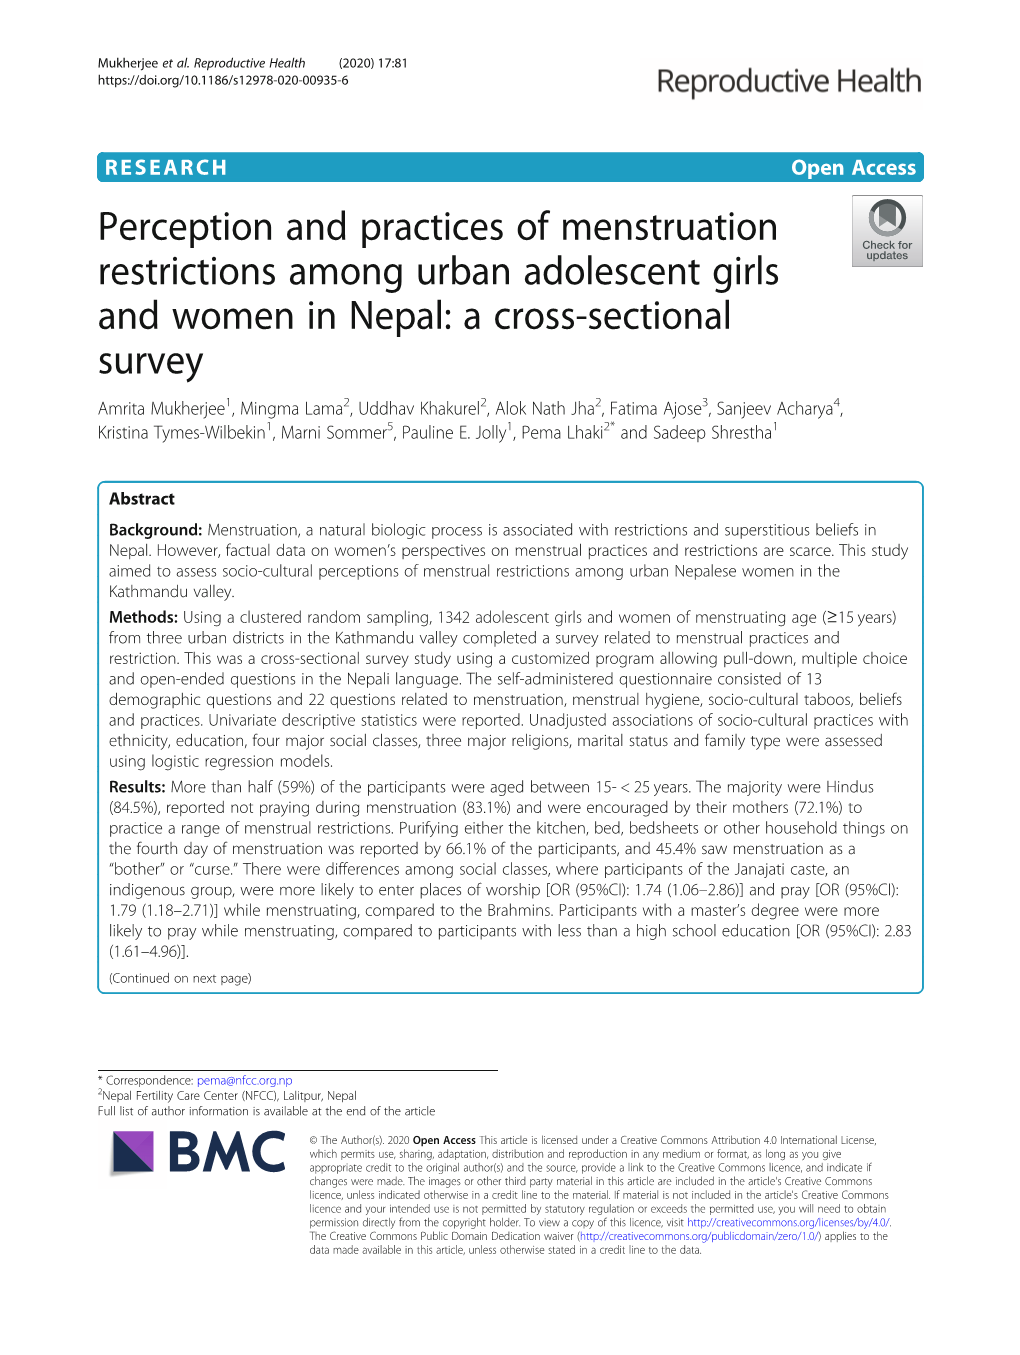 Perception and Practices of Menstruation Restrictions Among